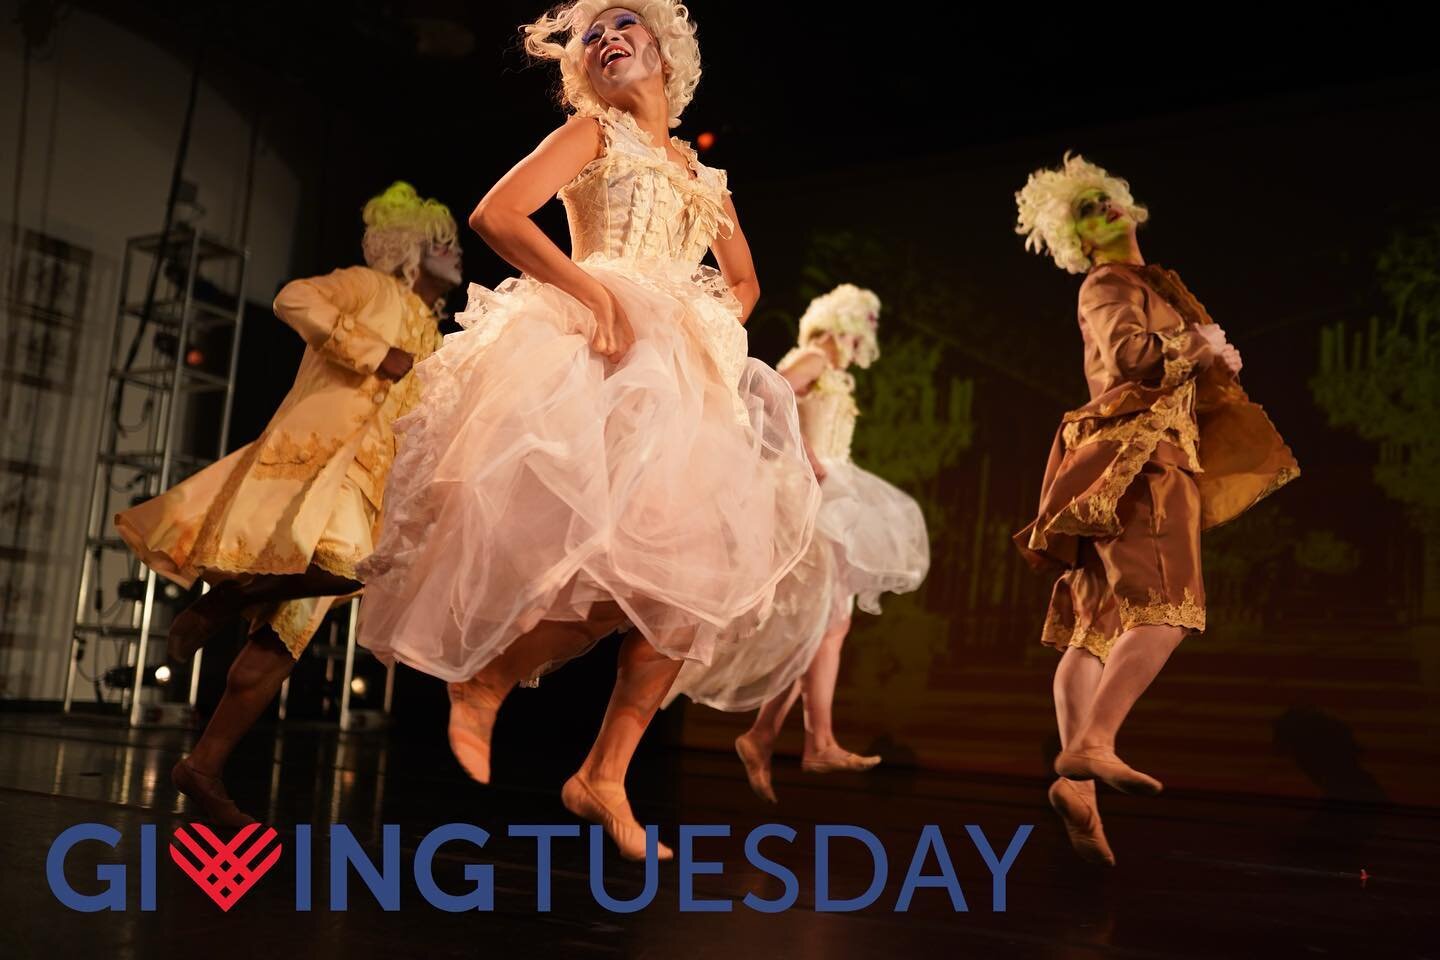 Donations help keep us afloat &mdash; consider giving through the link in our bio // #GivingTuesday 

photo from The Mad Scene (June 2022) @pinkcords

#supportartists #arts #performingarts #austin #texas #dance #theatre #nonprofit